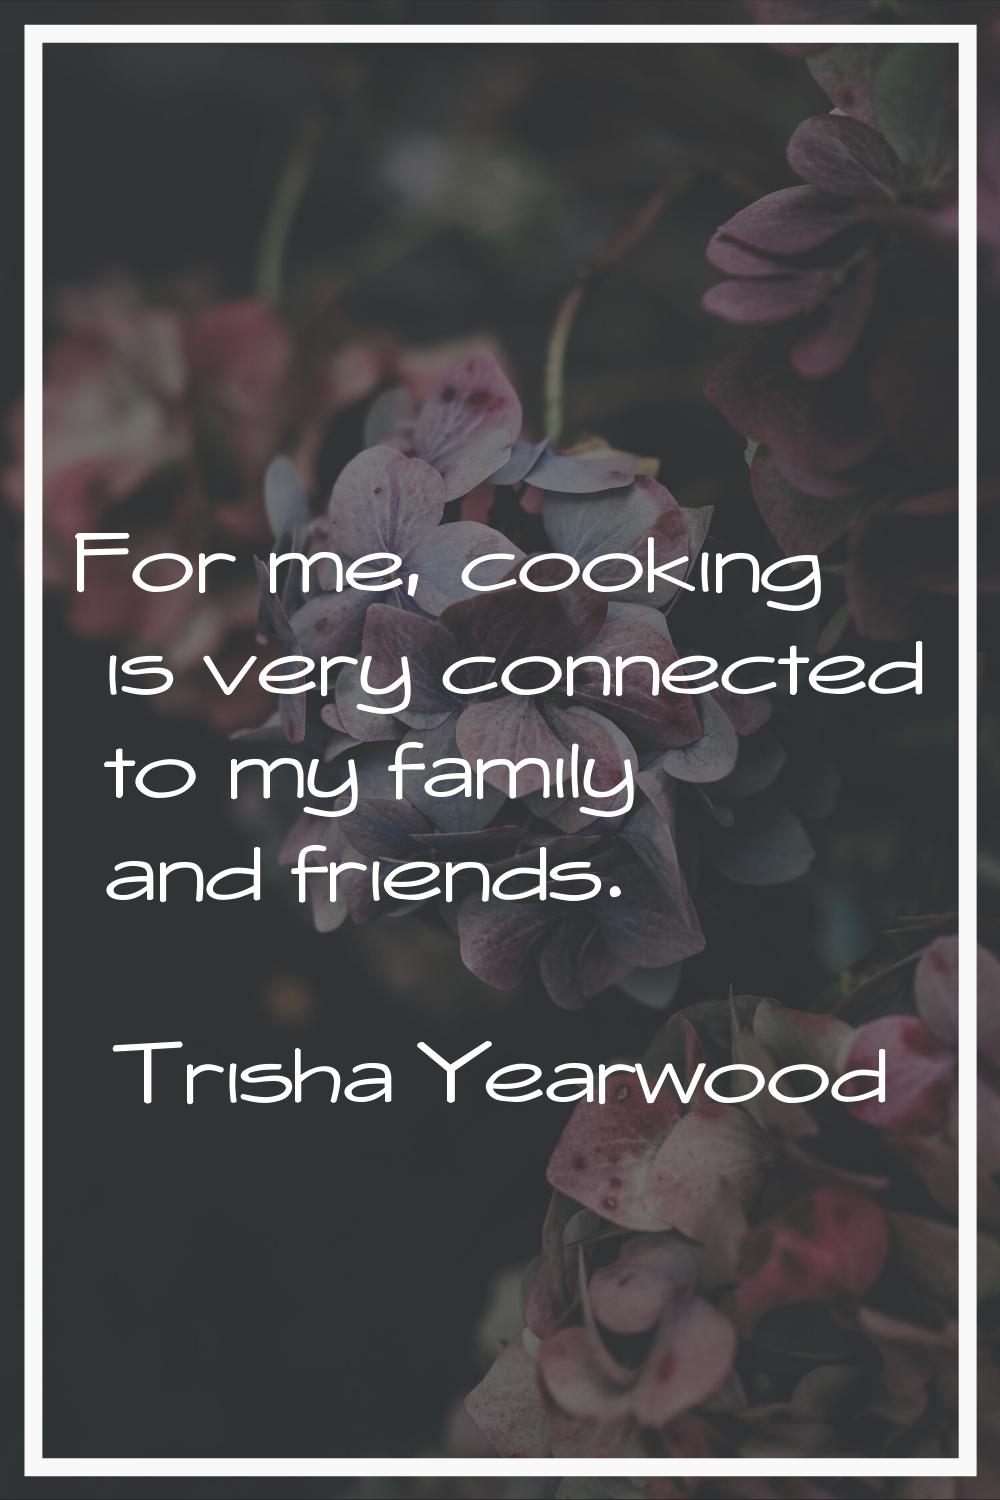 For me, cooking is very connected to my family and friends.